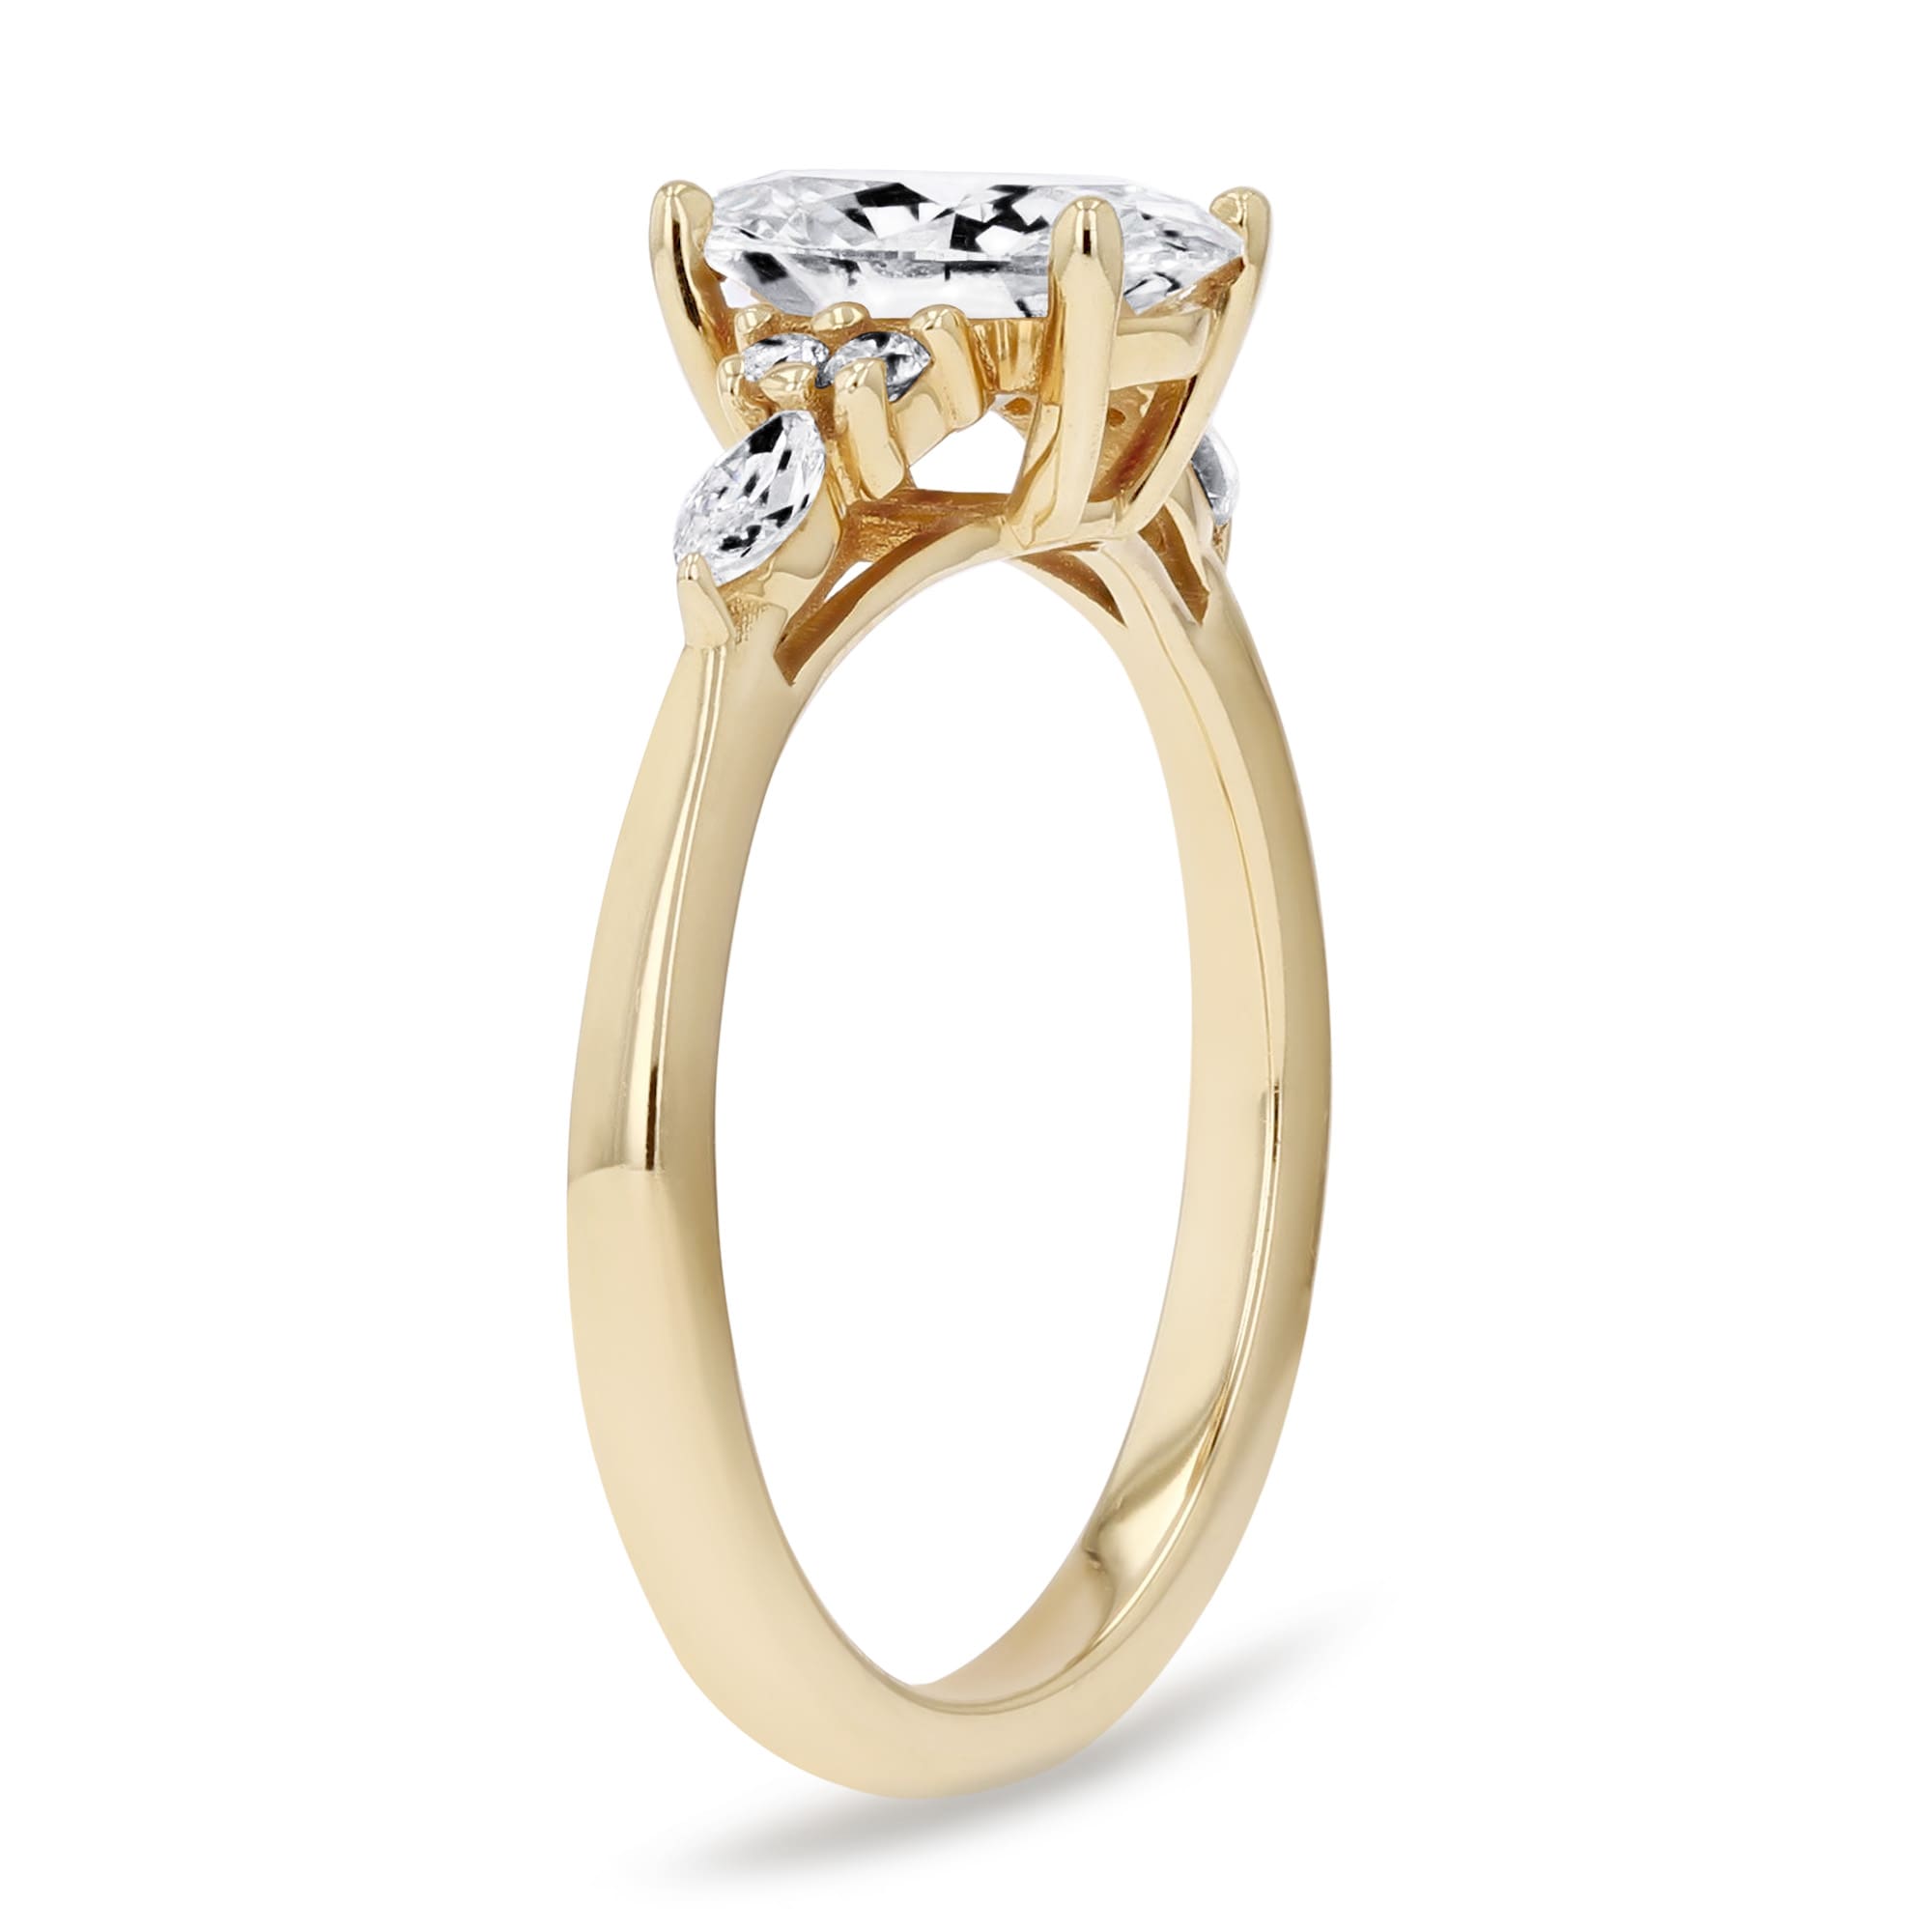 Shown with 1ct Oval Cut Lab Grown Diamond in 14K Yellow Gold|Diamond accented engagement ring with a 1ct oval cut lab grown diamond set in 14k yellow gold